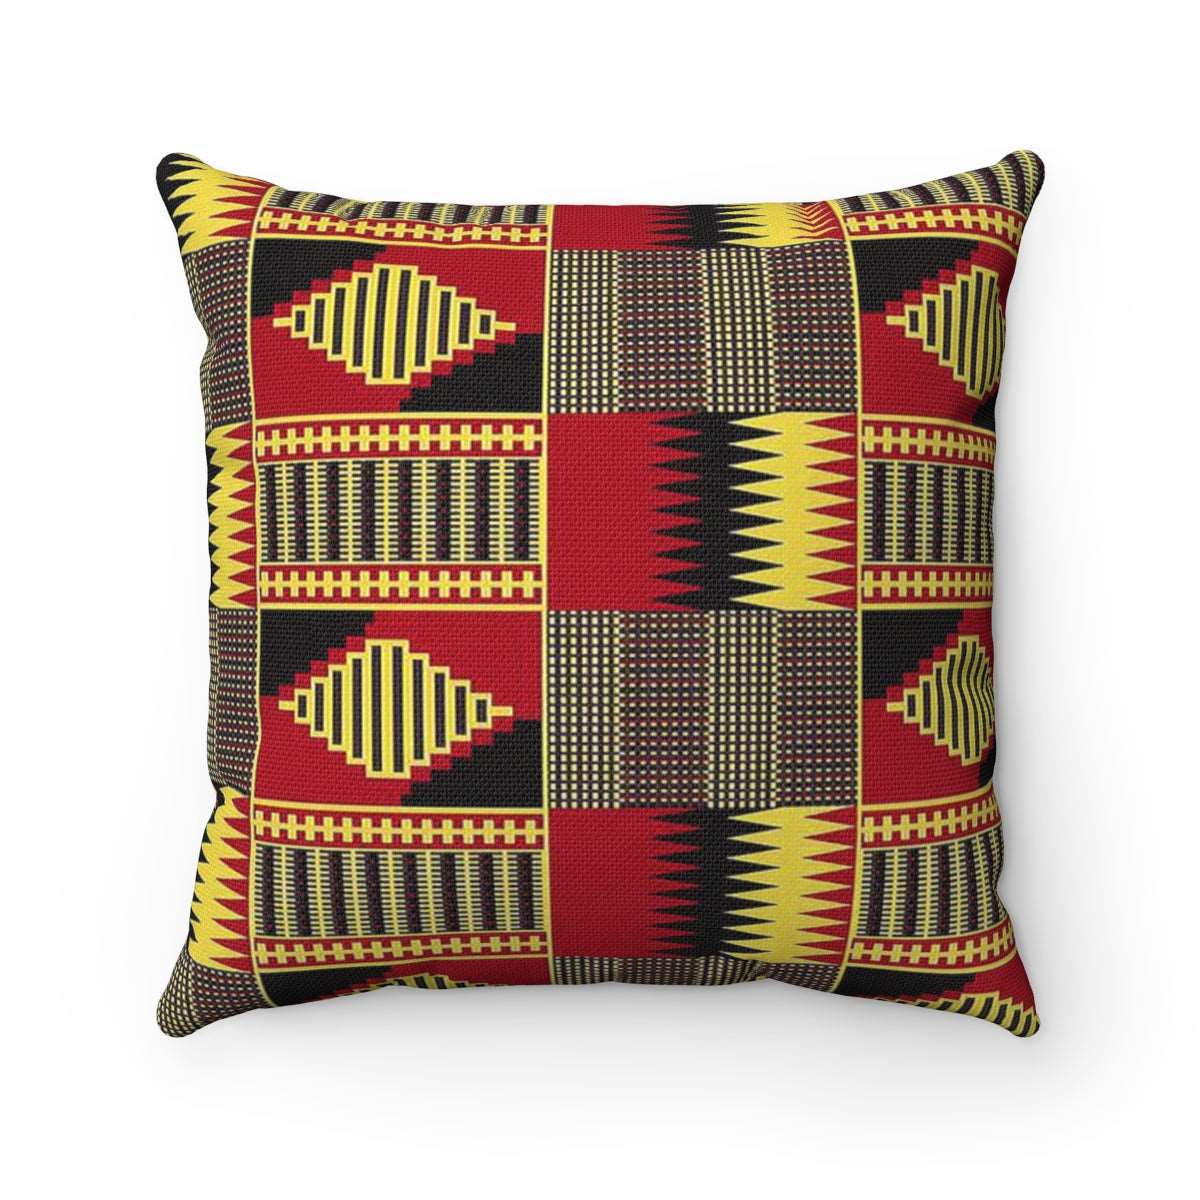 2 Sets of Kente Cushion Pillow Case Throw Cover - Bynelo